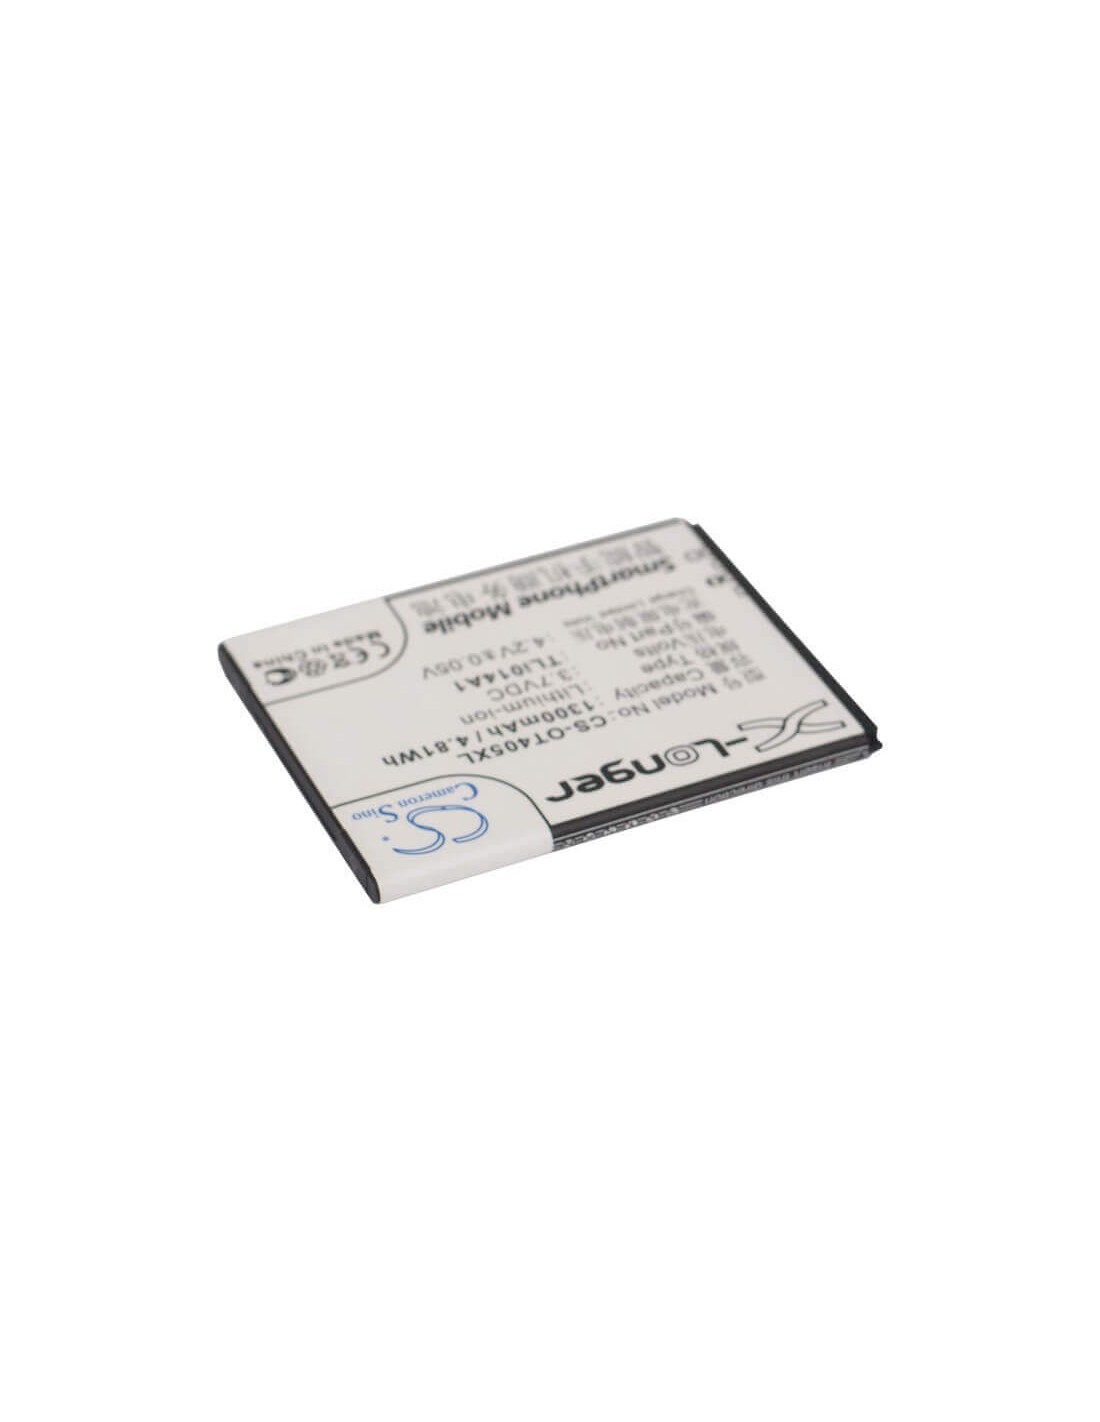 Battery for Alcatel OT-4005D, One Touch Glory 2T, One Touch 4005D 3.7V, 1300mAh - 4.81Wh